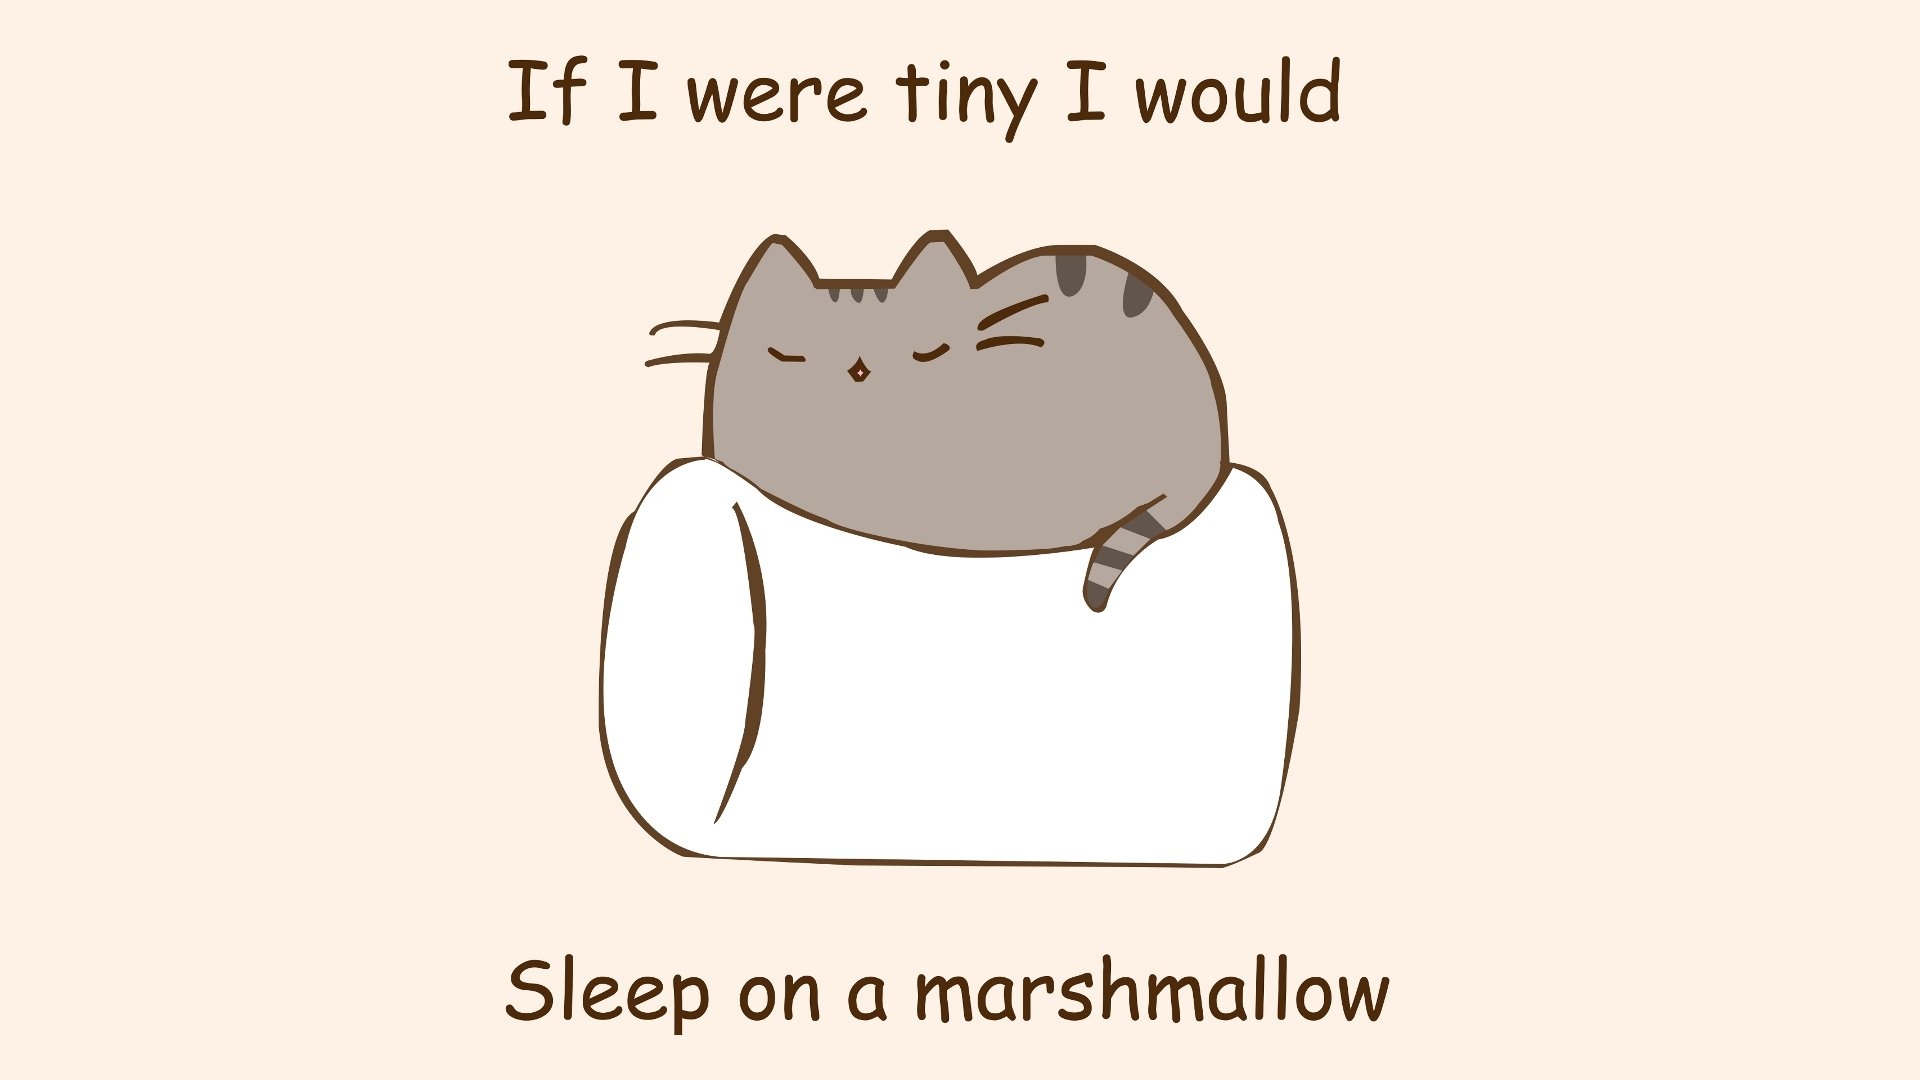 paintings, Minimalistic, Text, Cats, Marshmallow, Phrase, Simple Wallpaper